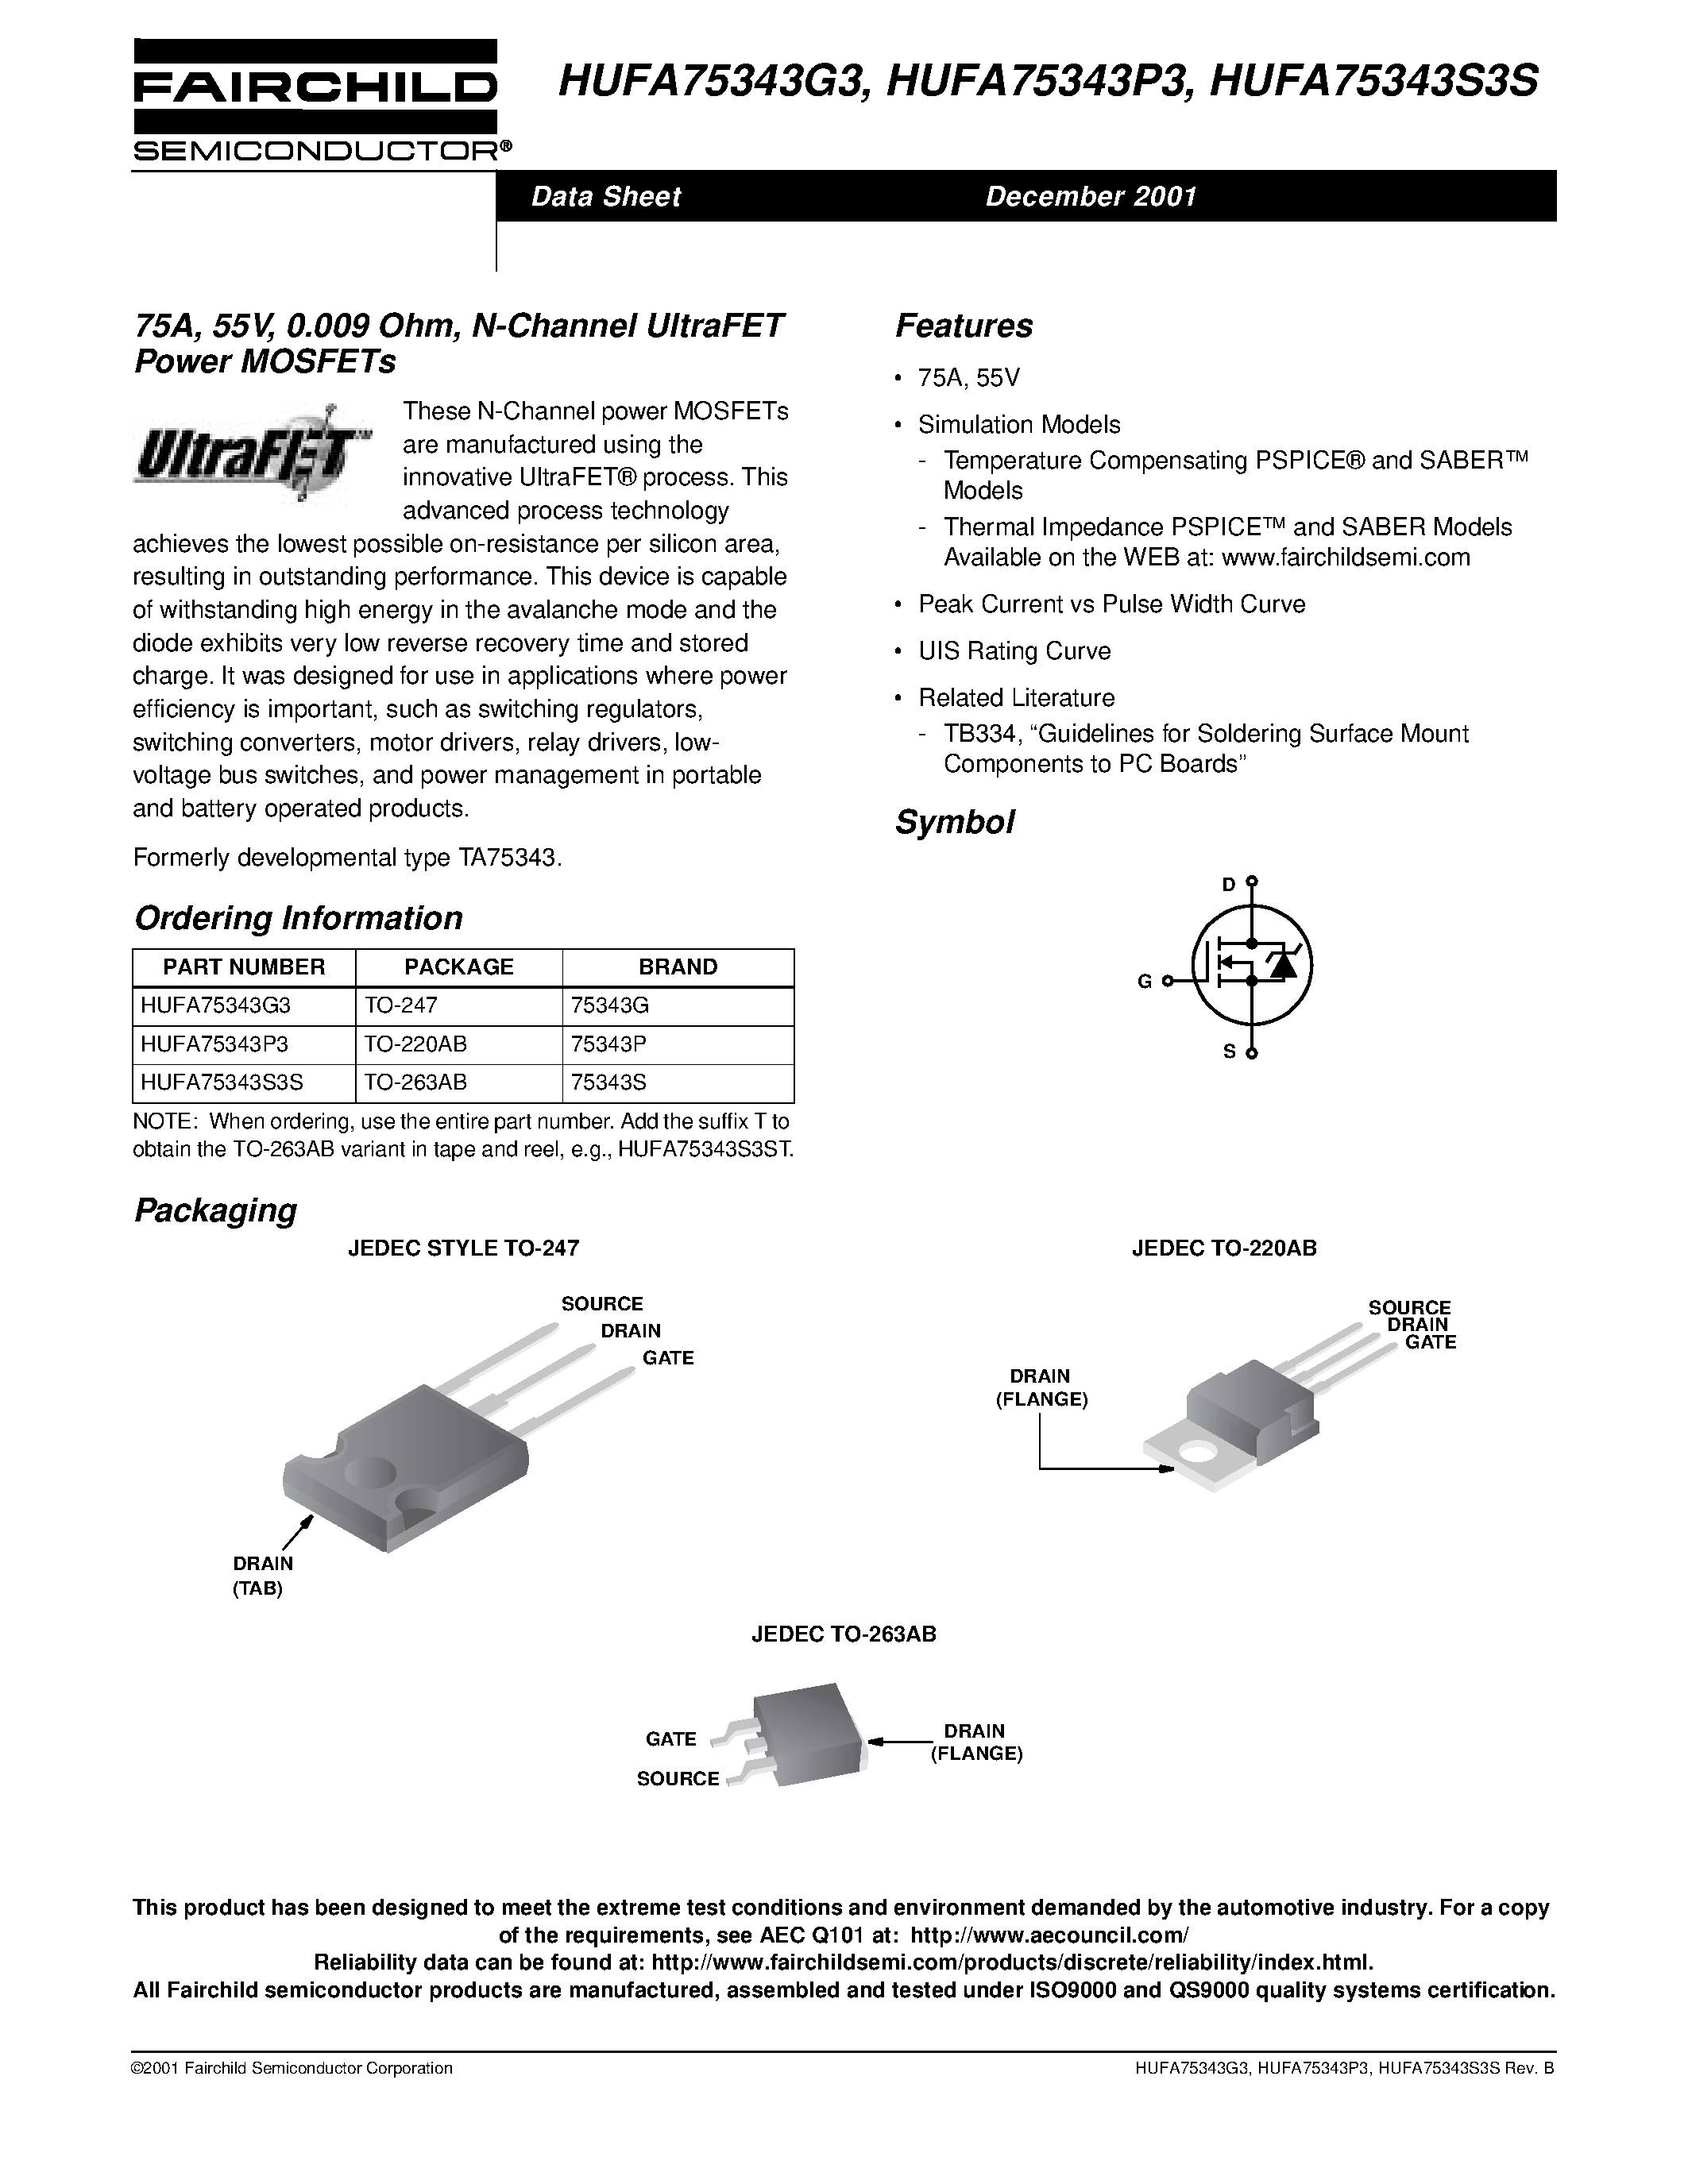 Datasheet HUFA75343G3 - 75A/ 55V/ 0.009 Ohm/ N-Channel UltraFET Power MOSFETs page 1